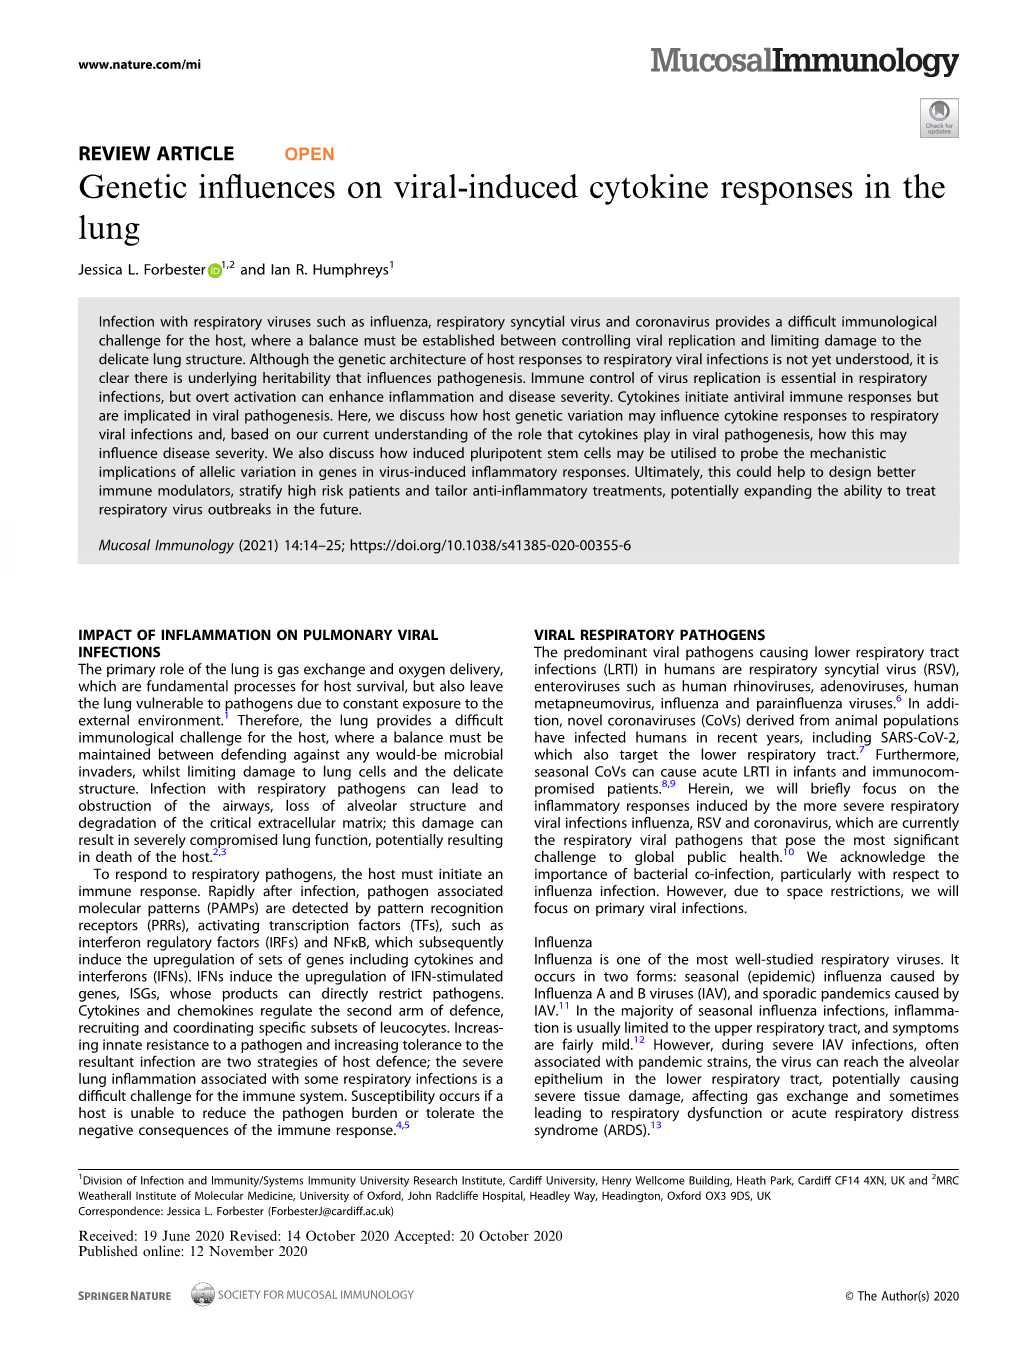 Genetic Influences on Viral-Induced Cytokine Responses in the Lung